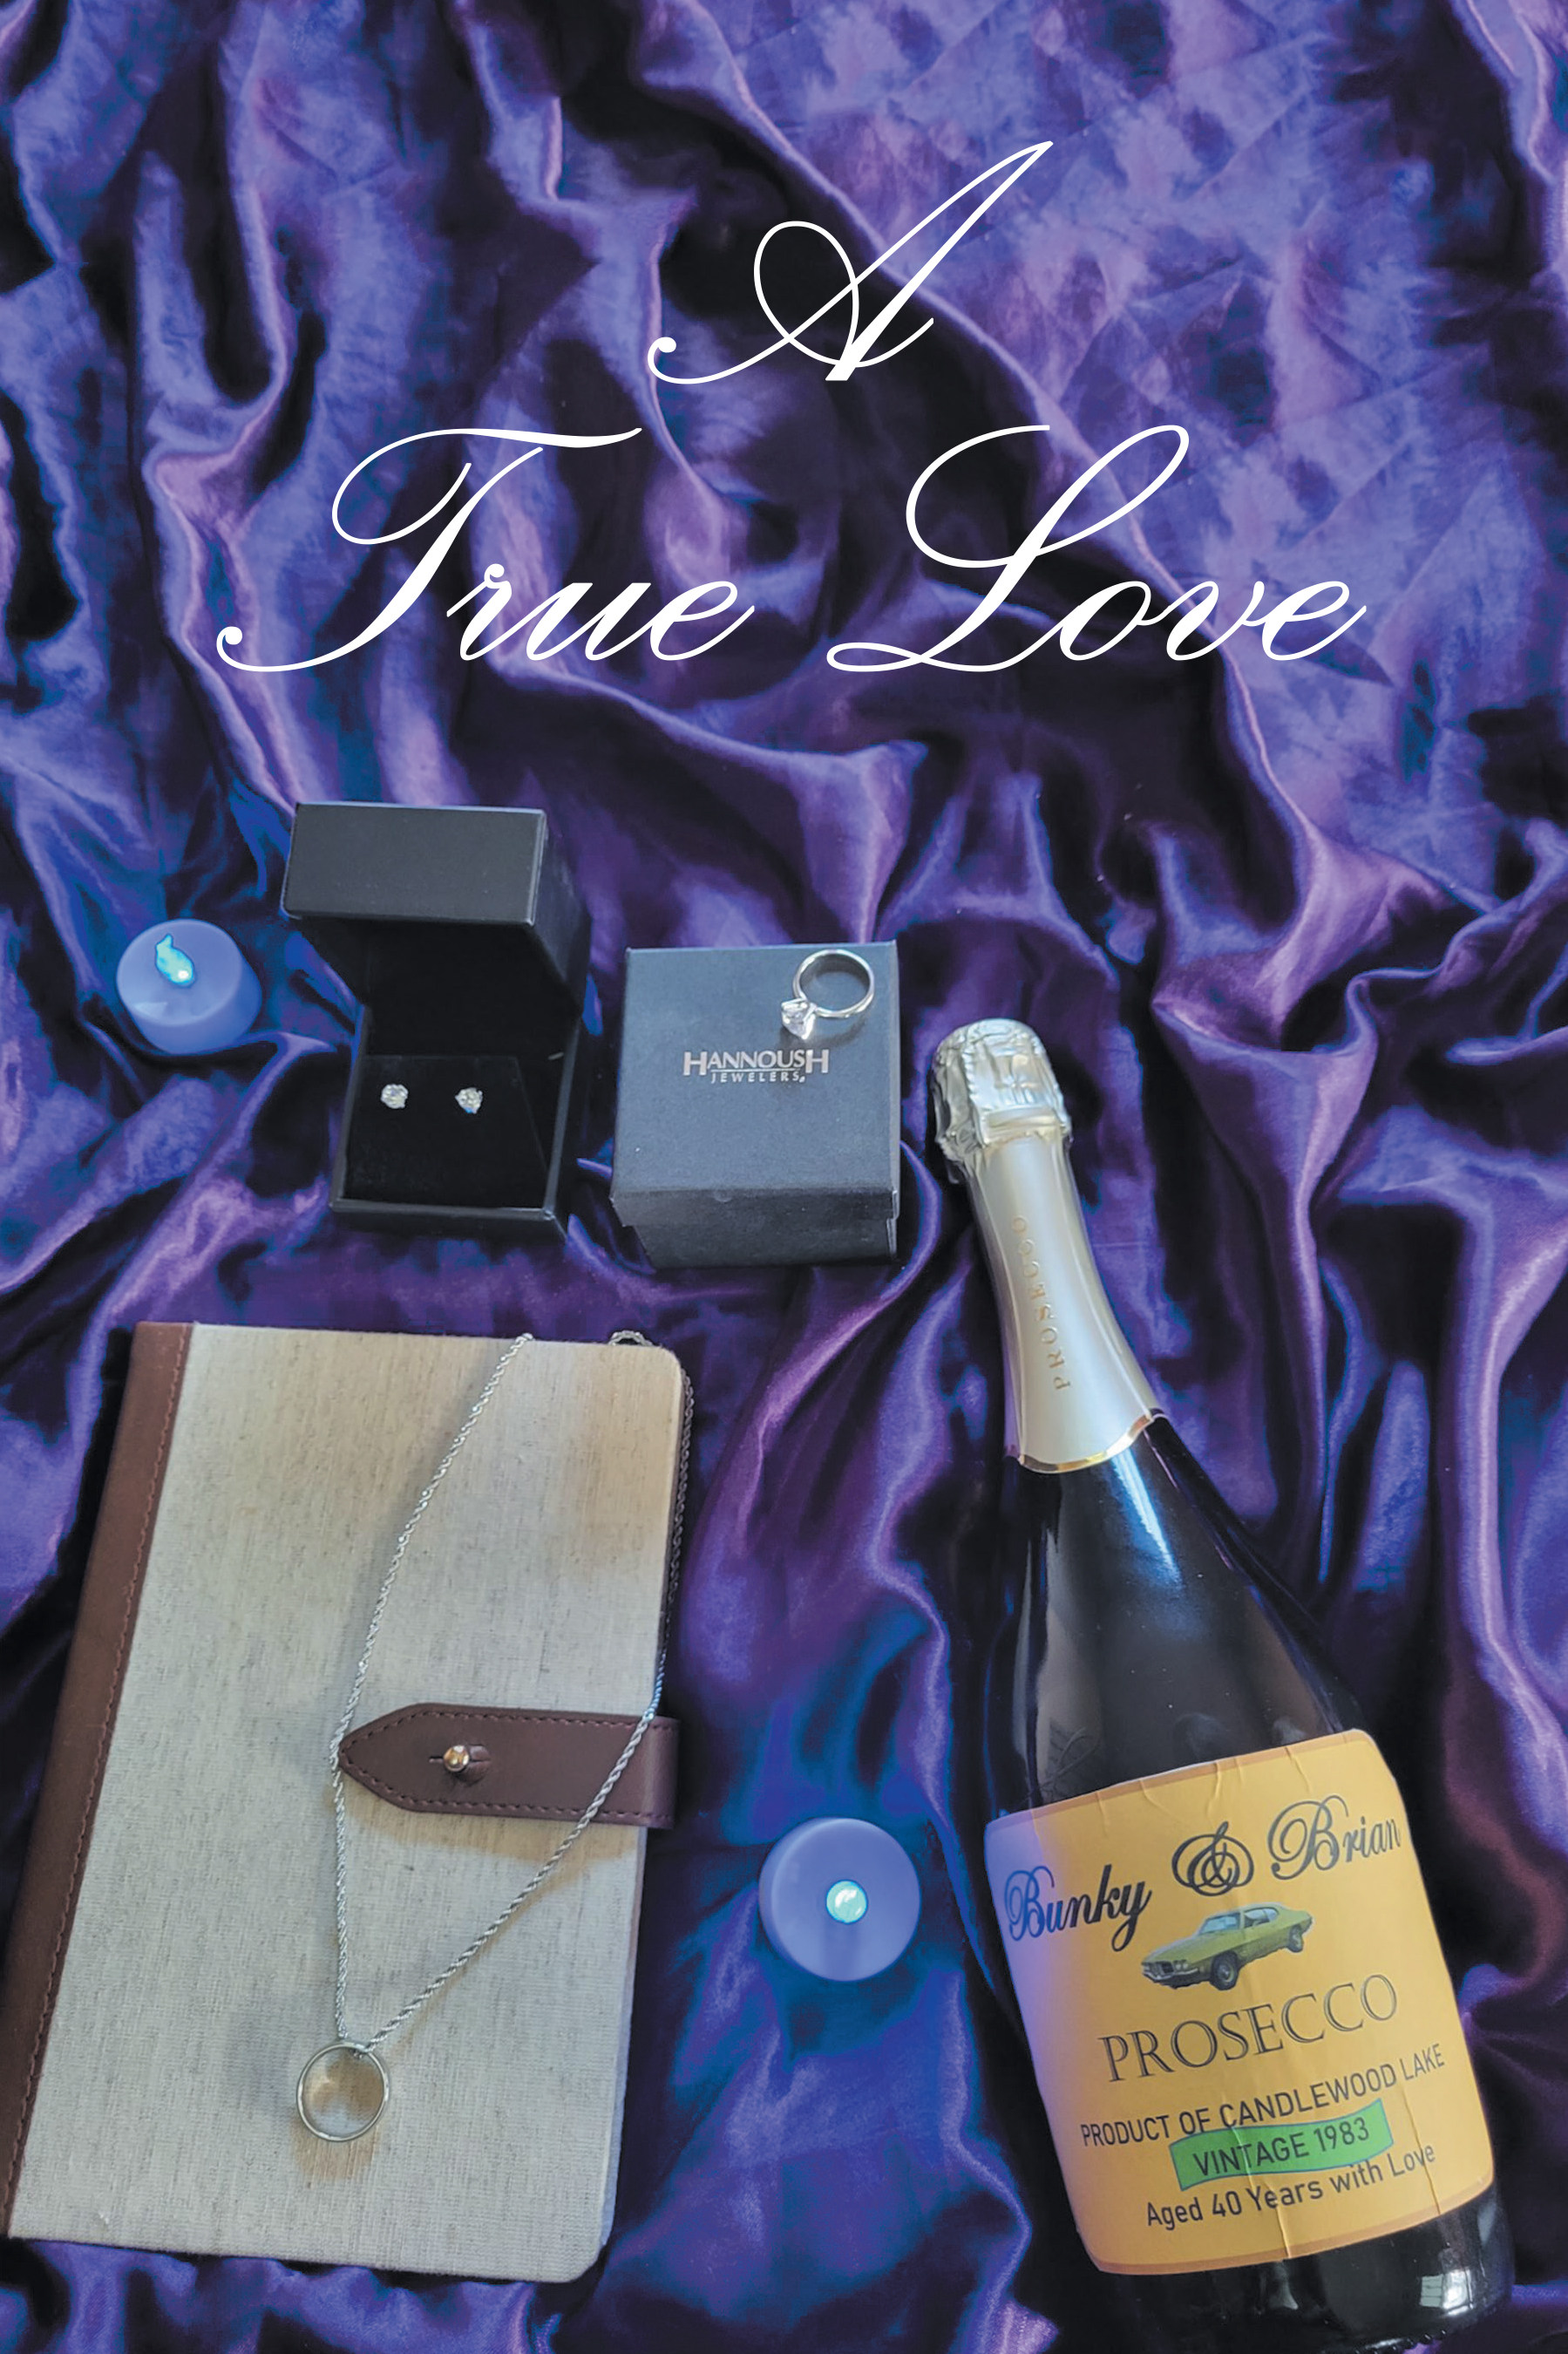 Brian Kery’s New Book, "A True Love," is a Brilliant Collection of Poems Describing the Stirring Journey the Author Experienced Through the Power of Love